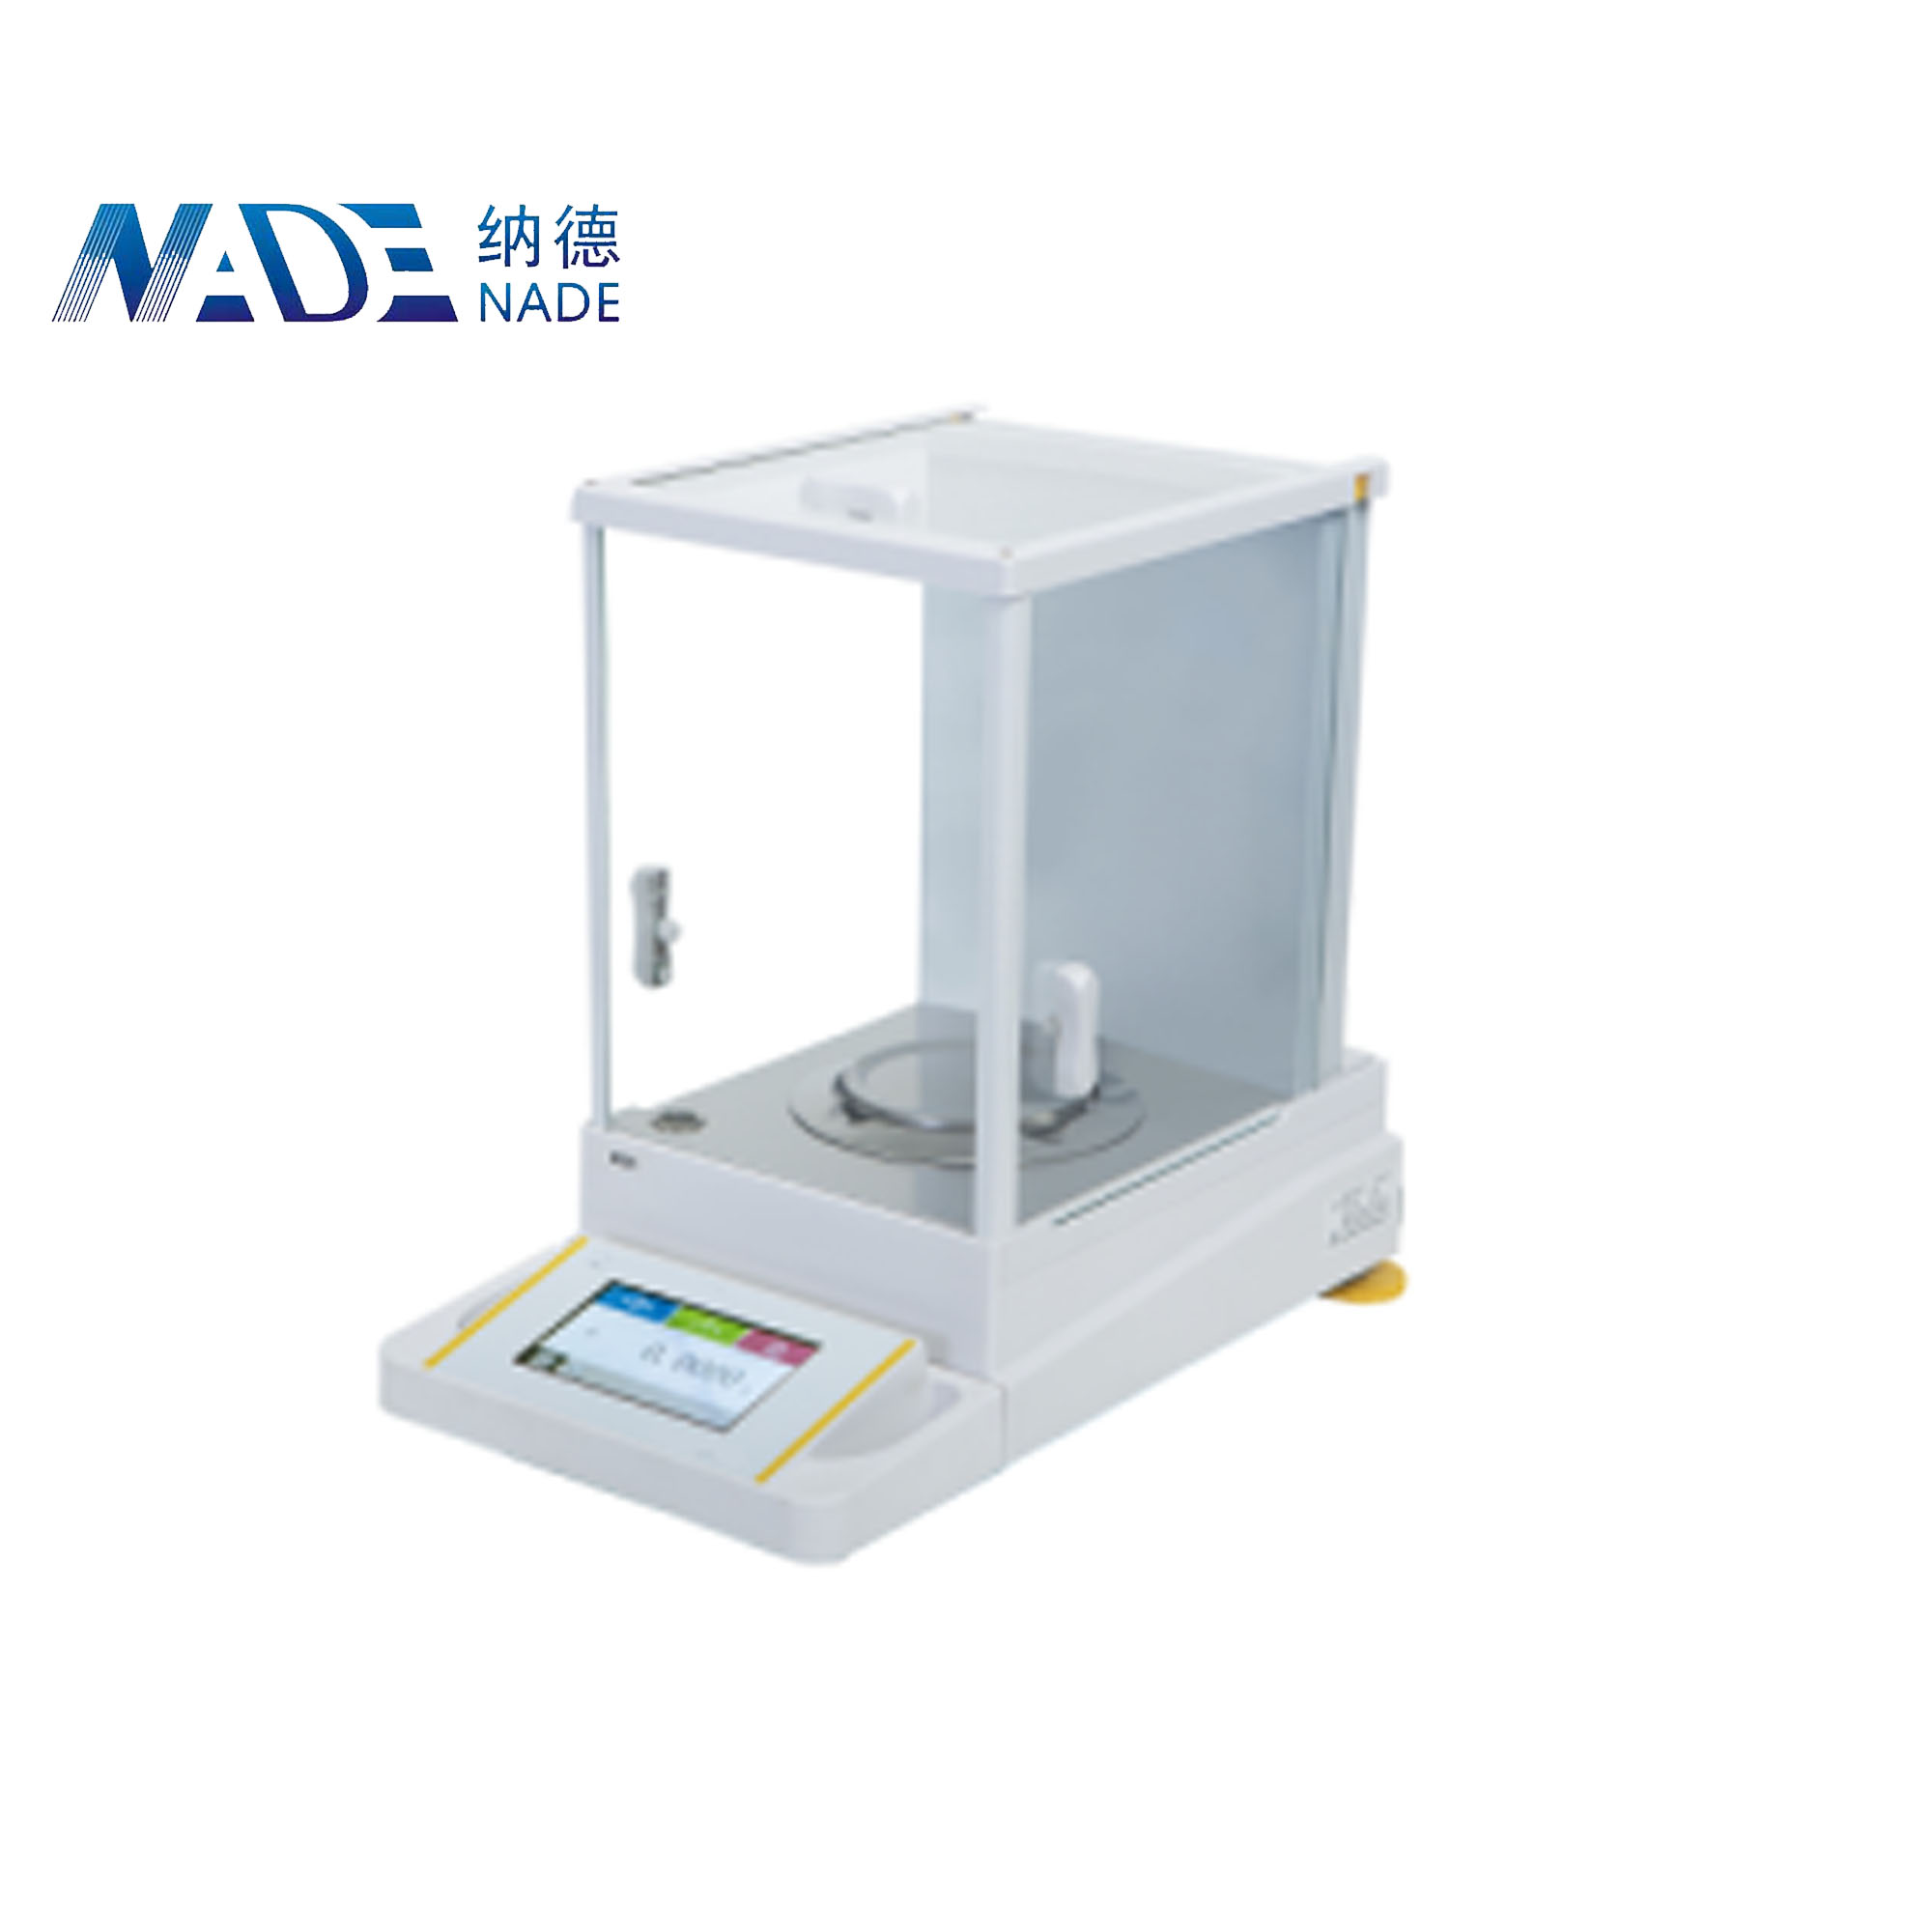 Nade AE Touch Color Screen Electronic Analytic Balance Internal Calibration AE124C 120g/0.0001g